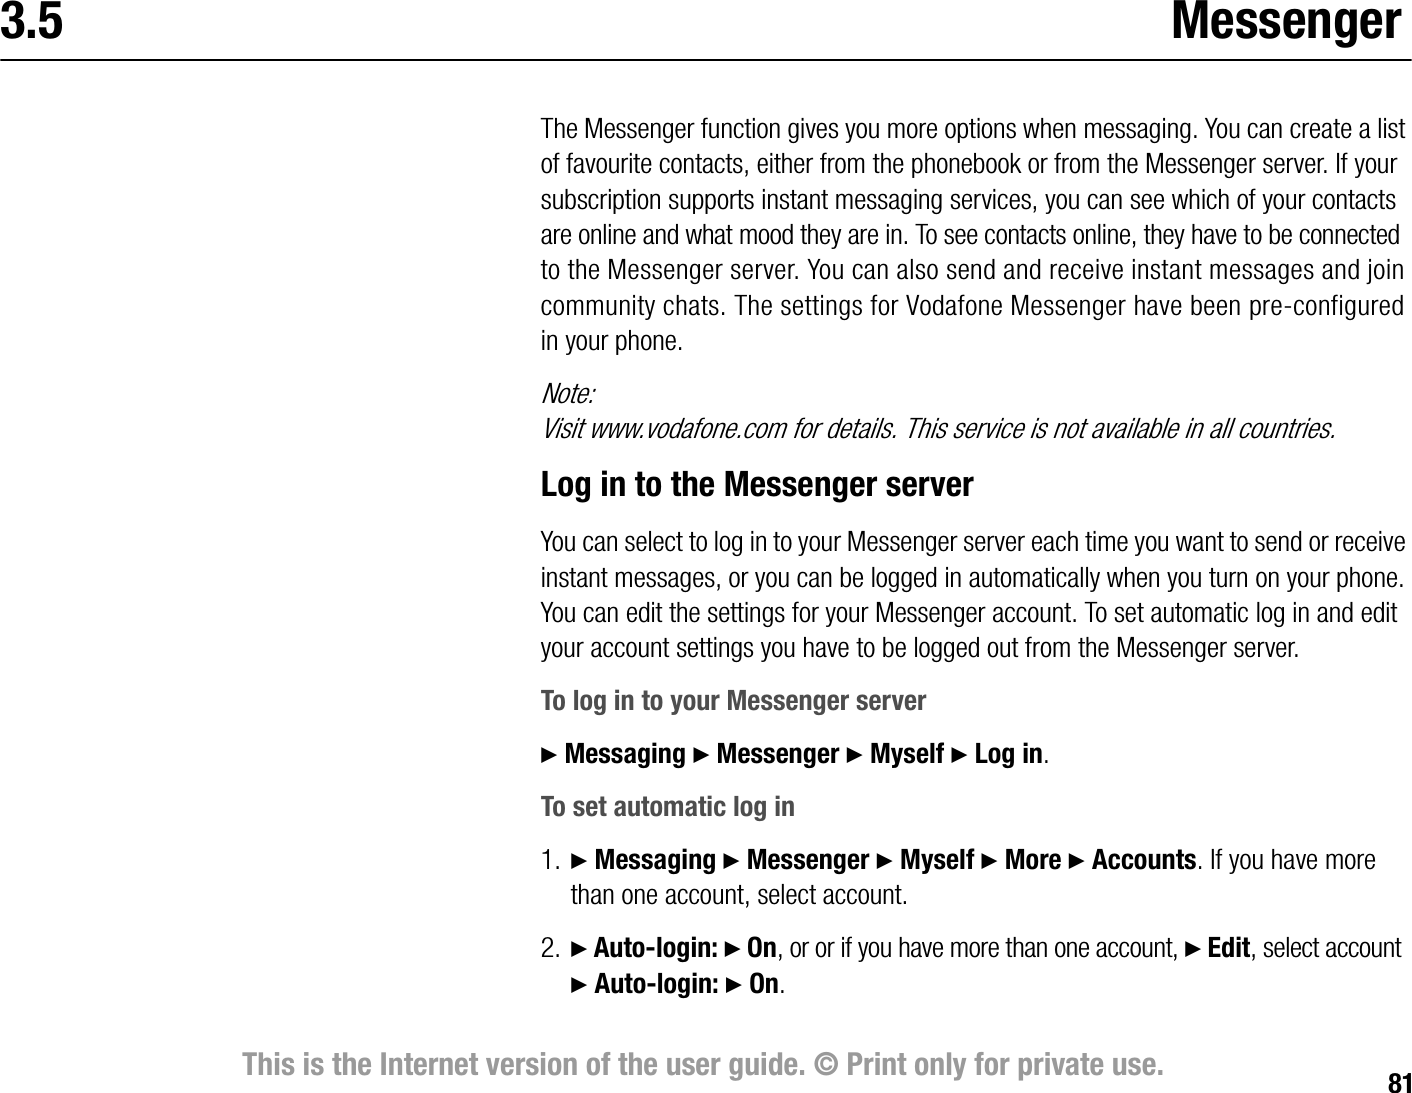 81This is the Internet version of the user guide. © Print only for private use.3.5 MessengerThe Messenger function gives you more options when messaging. You can create a list of favourite contacts, either from the phonebook or from the Messenger server. If your subscription supports instant messaging services, you can see which of your contacts are online and what mood they are in. To see contacts online, they have to be connected to the Messenger server. You can also send and receive instant messages and join community chats. The settings for Vodafone Messenger have been preconfigured in your phone.Note:Visit www.vodafone.com for details. This service is not available in all countries.Log in to the Messenger serverYou can select to log in to your Messenger server each time you want to send or receive instant messages, or you can be logged in automatically when you turn on your phone. You can edit the settings for your Messenger account. To set automatic log in and edit your account settings you have to be logged out from the Messenger server.To log in to your Messenger server} Messaging } Messenger } Myself } Log in.To set automatic log in1. } Messaging } Messenger } Myself } More } Accounts. If you have more than one account, select account.2. } Autologin: } On, or or if you have more than one account, } Edit, select account }Autologin: } On.